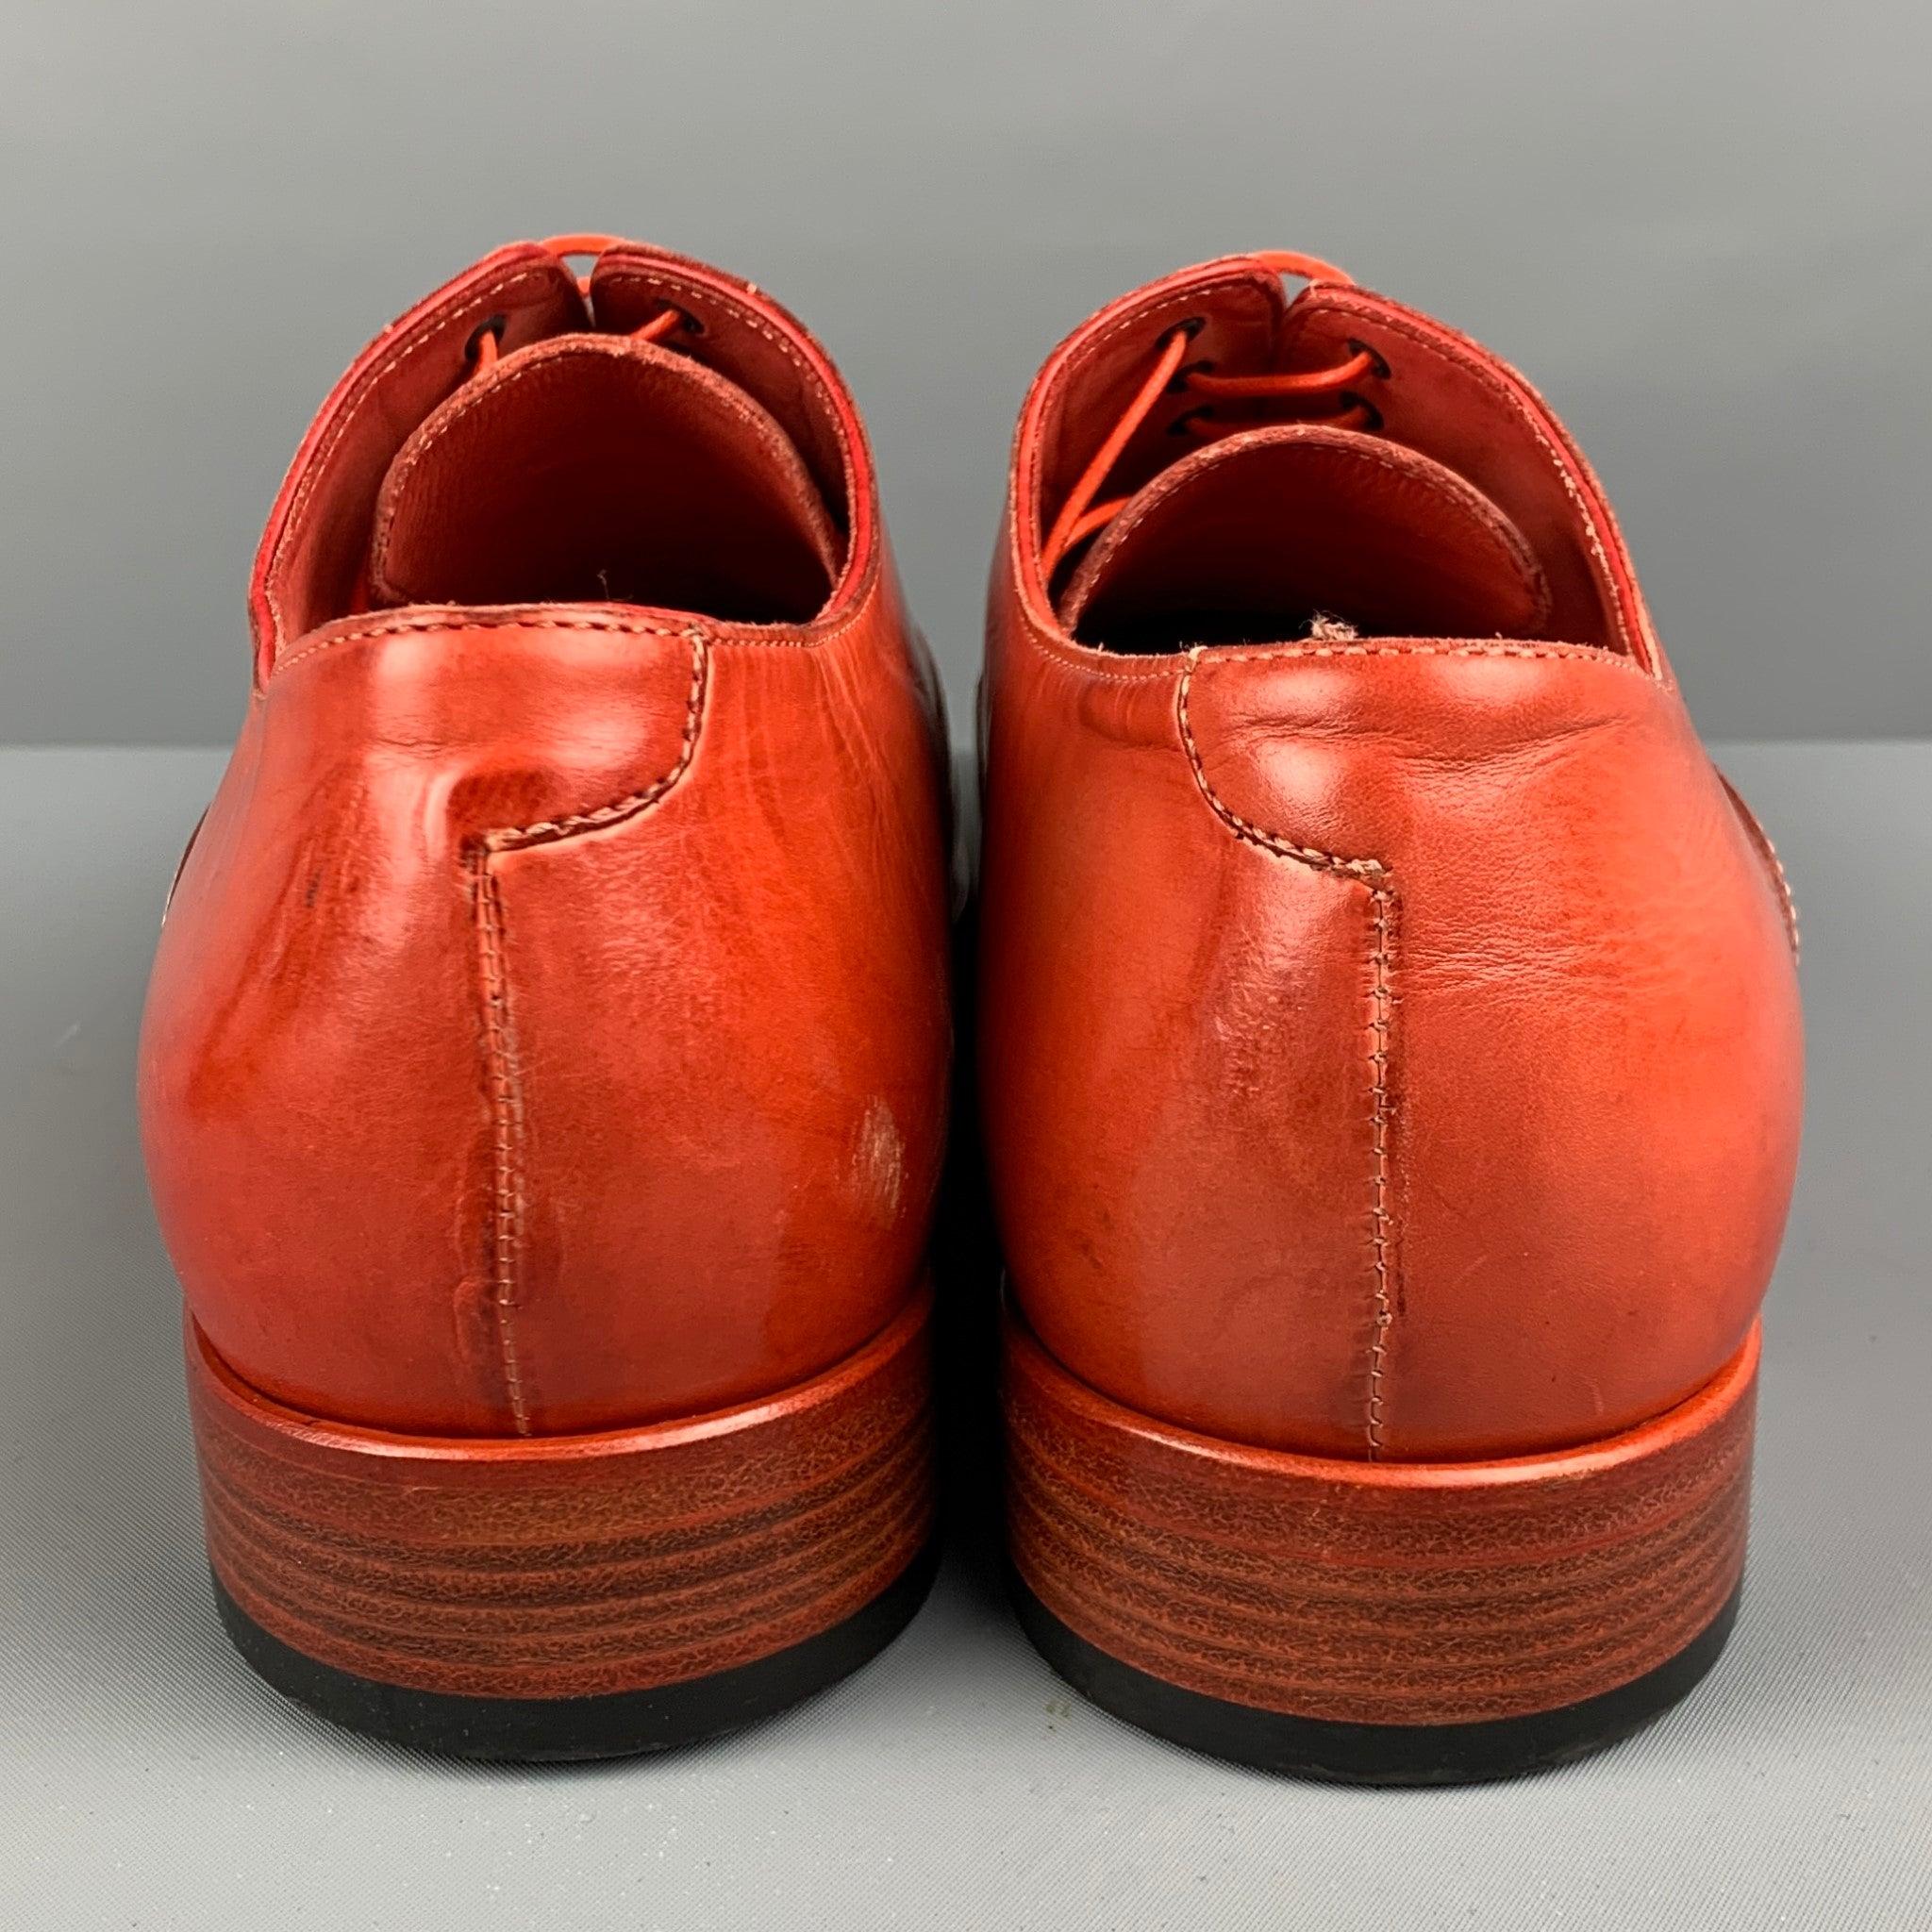 PAUL SMITH Size 8.5 Orange Perforated Leather Cap Toe Lace Up Shoes In Good Condition For Sale In San Francisco, CA